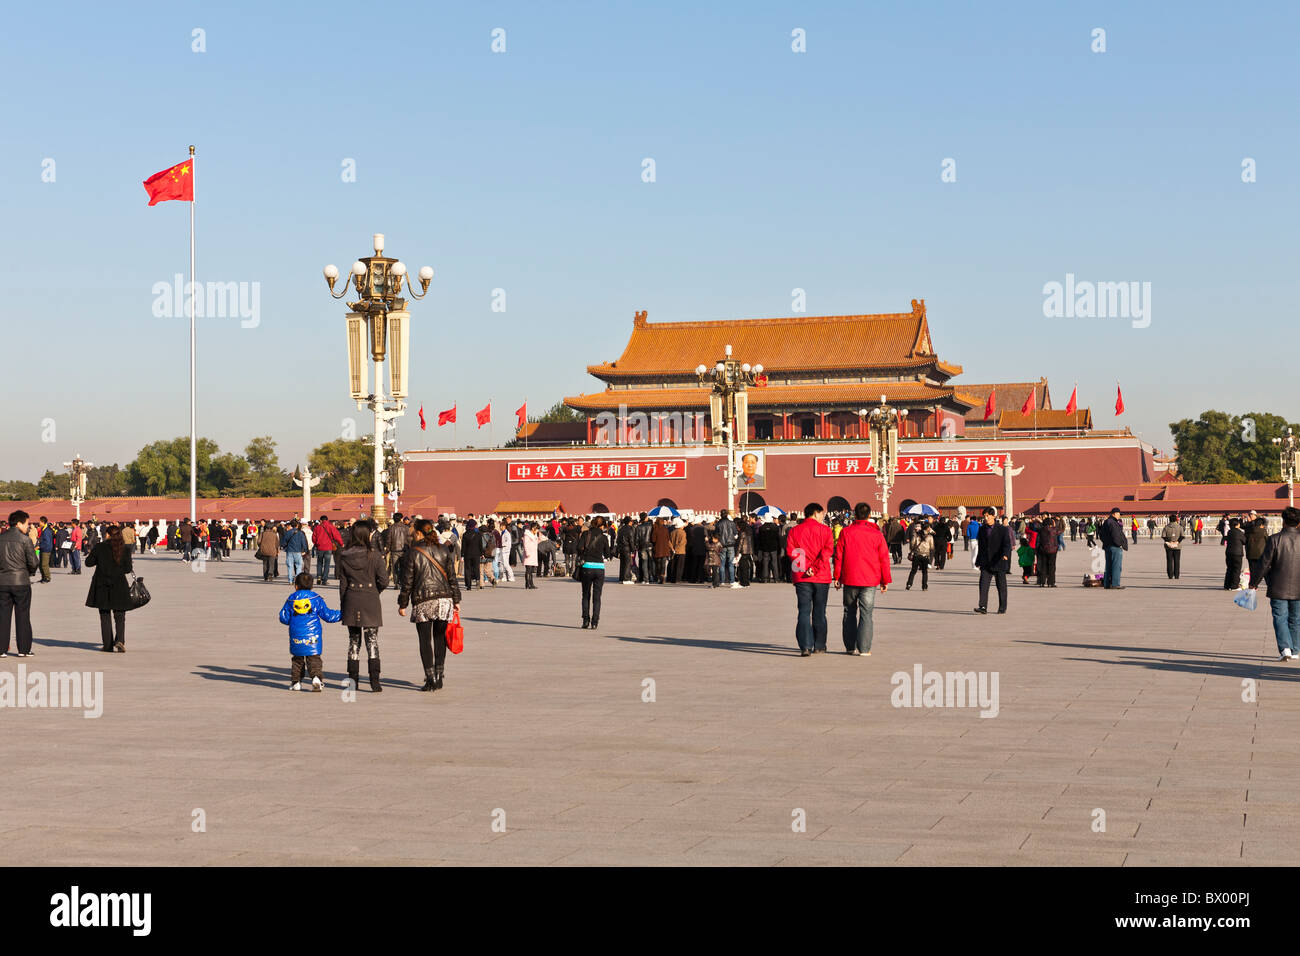 The Tiananmen, also known as Gate of Heavenly Peace, Tiananmen Square, Beijing, China Stock Photo